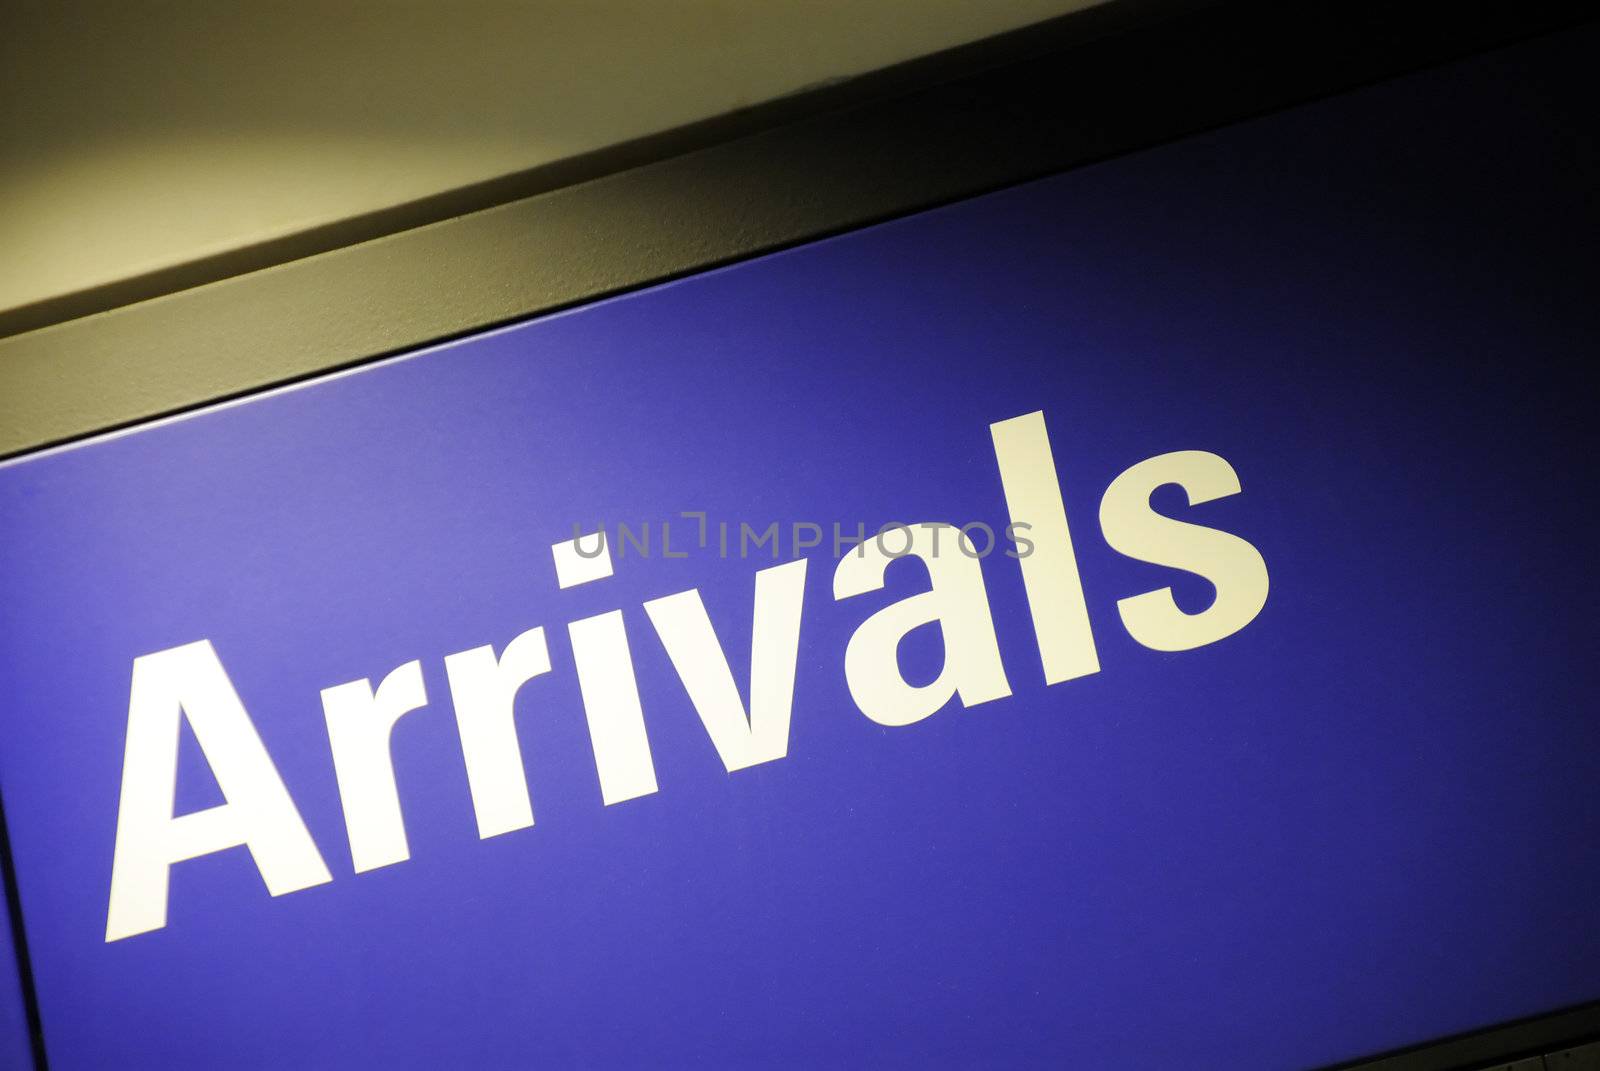 Arrivals sign at the airport terminal